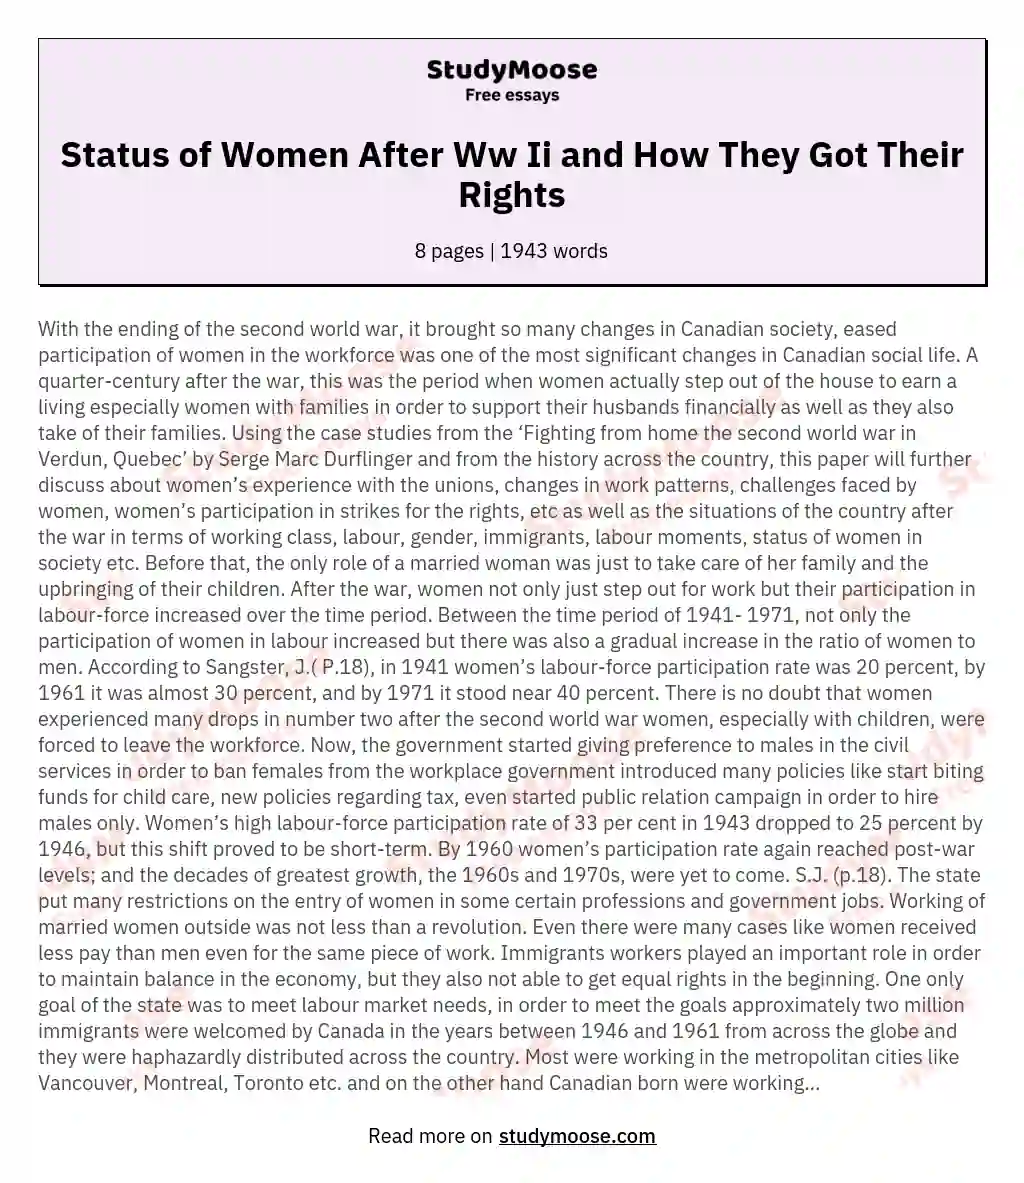 Status of Women After Ww Ii and How They Got Their Rights essay